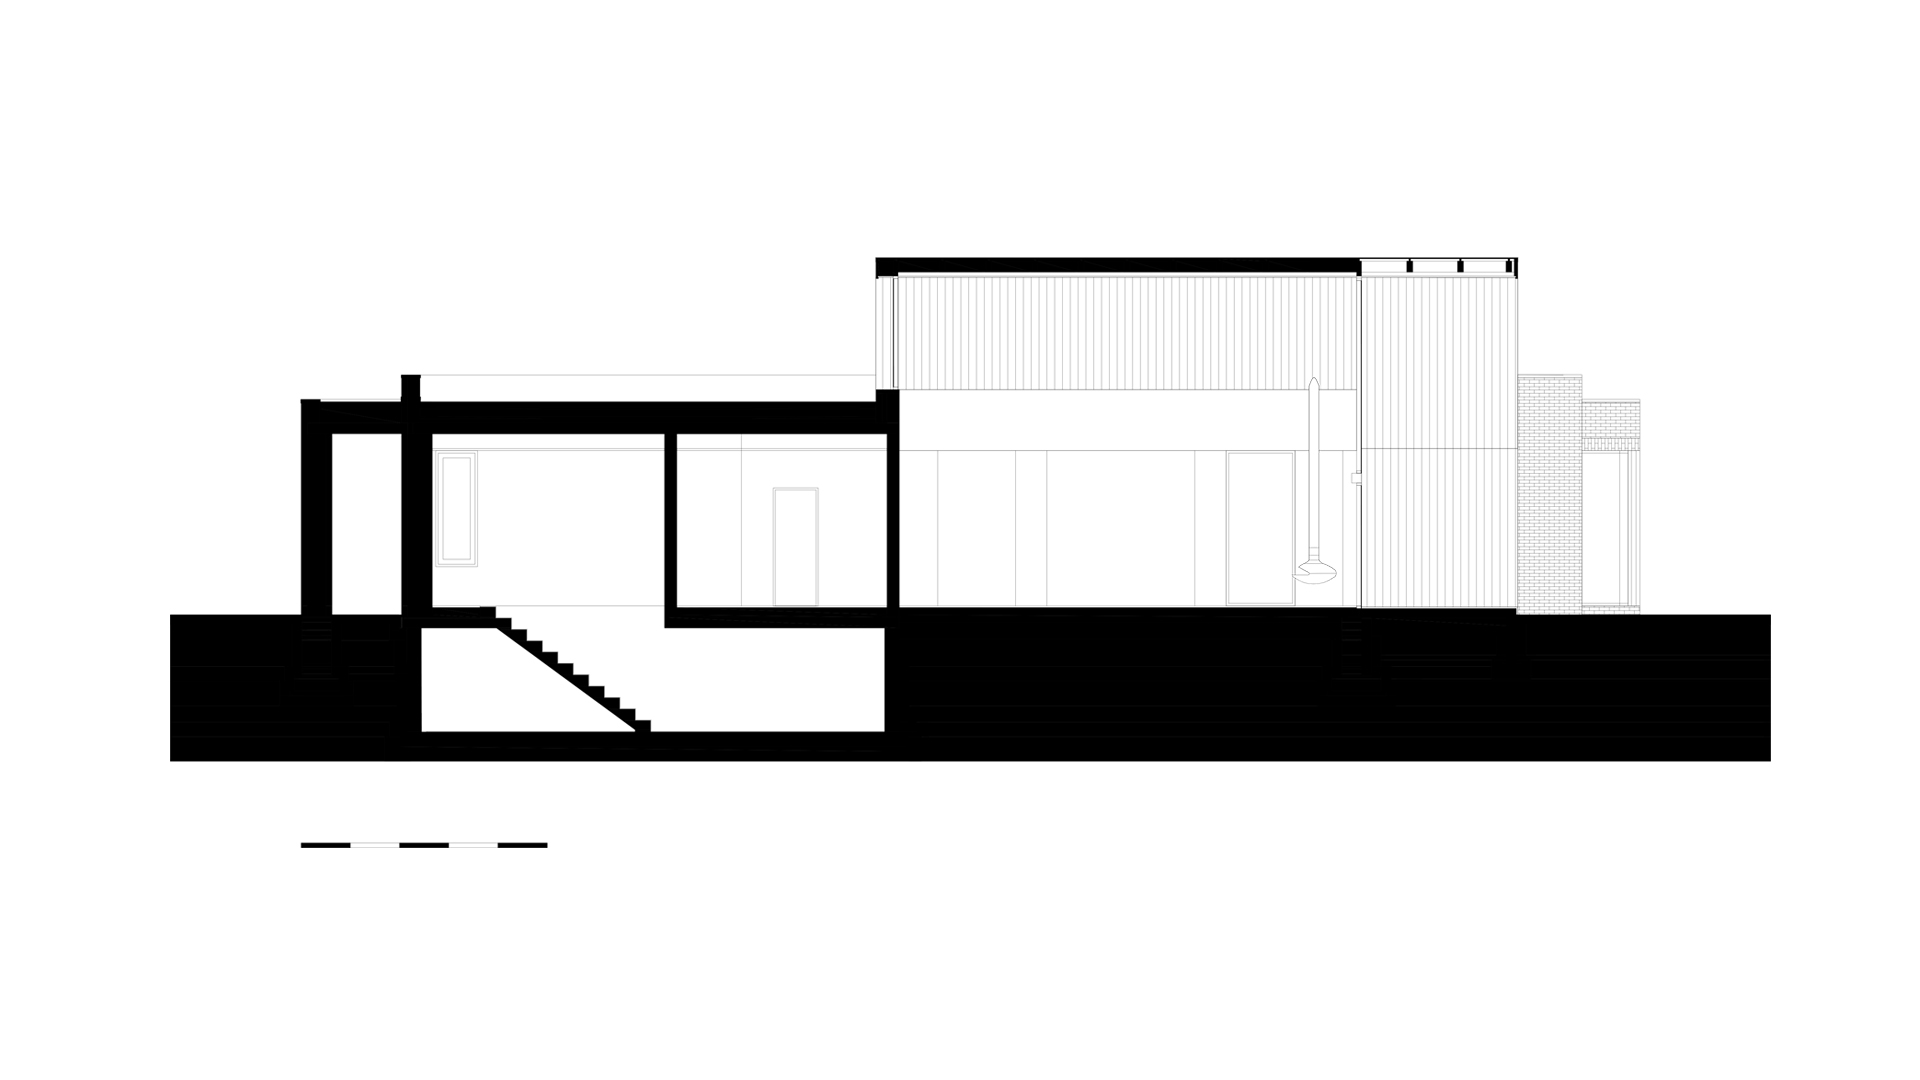 floor plan of the house